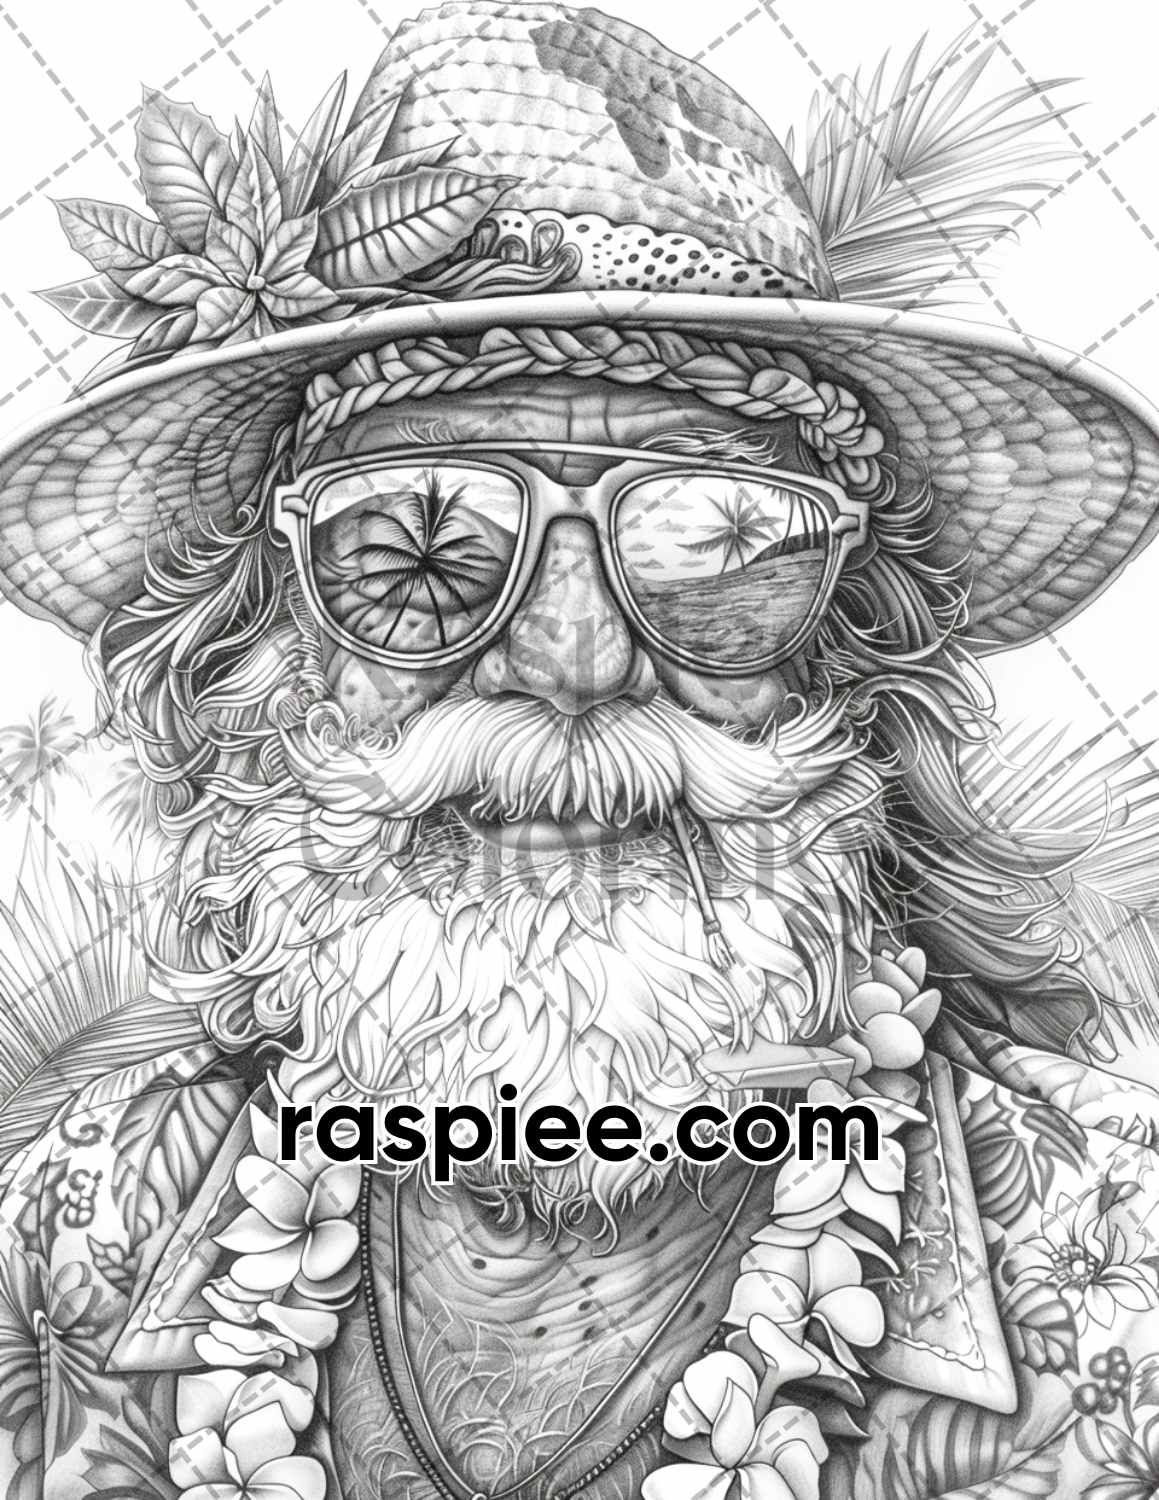 adult coloring pages, adult coloring sheets, adult coloring book pdf, adult coloring book printable, grayscale coloring pages, grayscale coloring books, chriatmas in july coloring pages for adults, santa claus coloring book, grayscale illustration